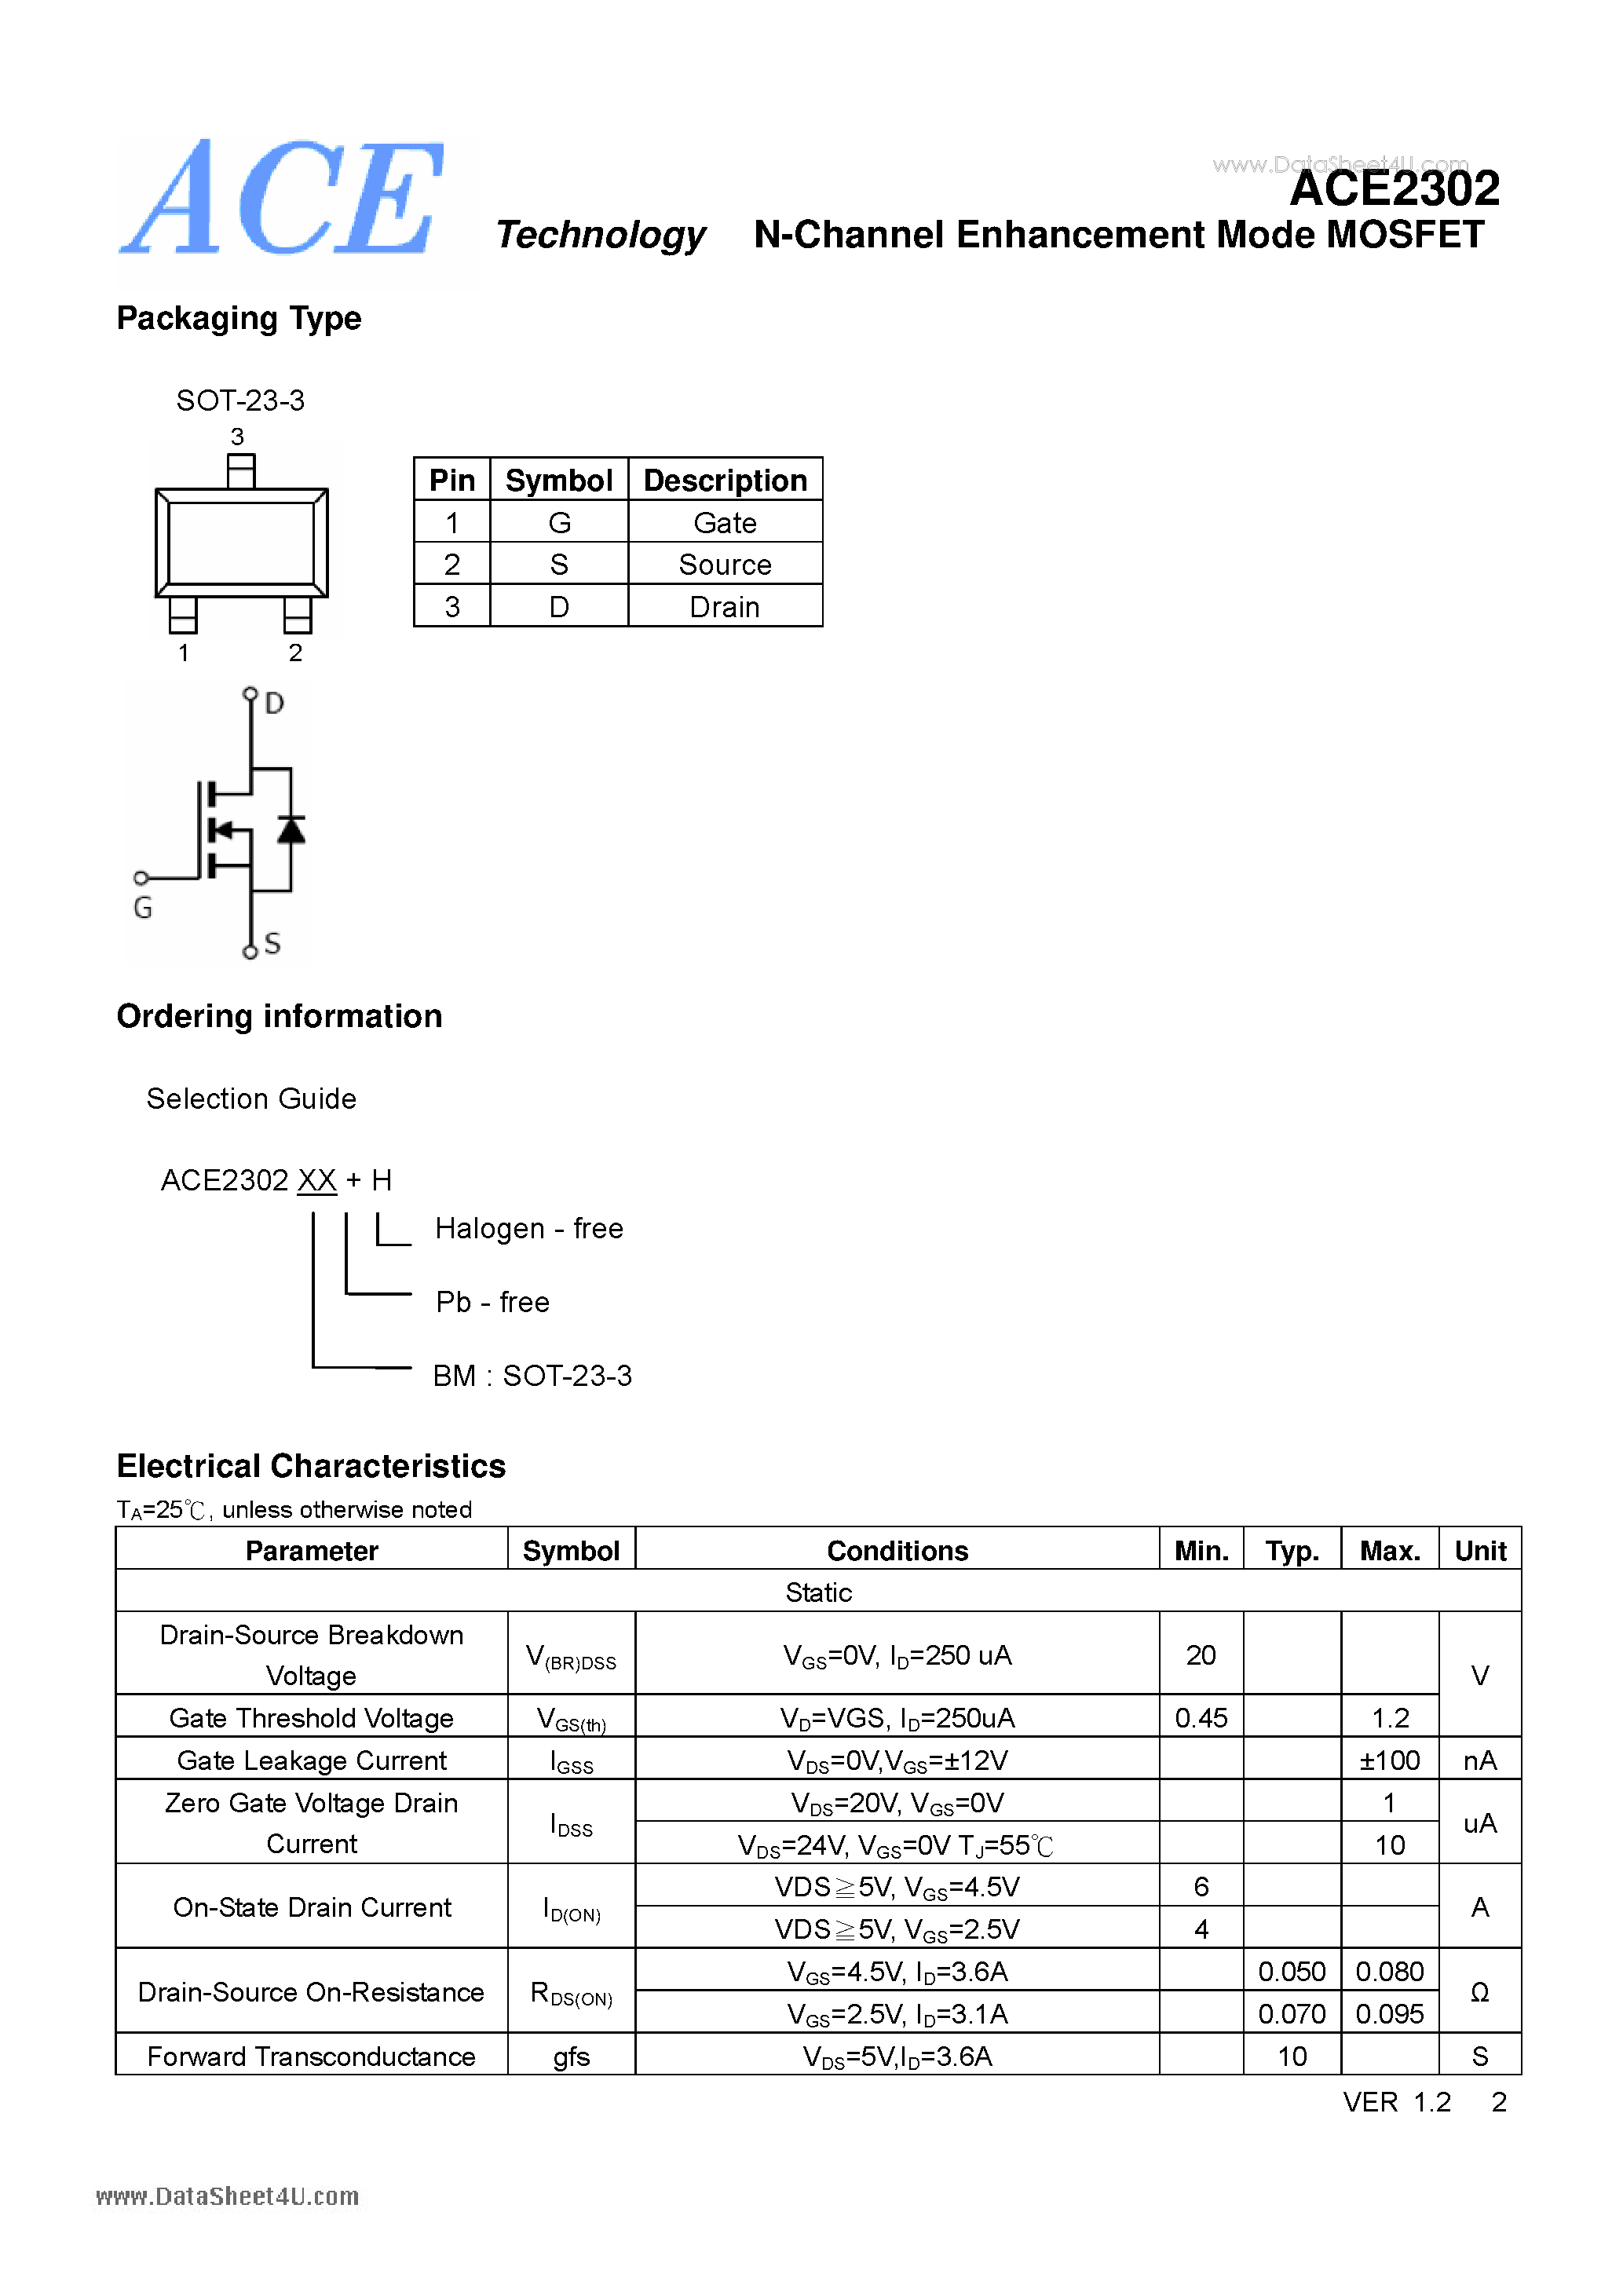 Datasheet ACE2302 - N-Channel Enhancement Mode MOSFET page 2